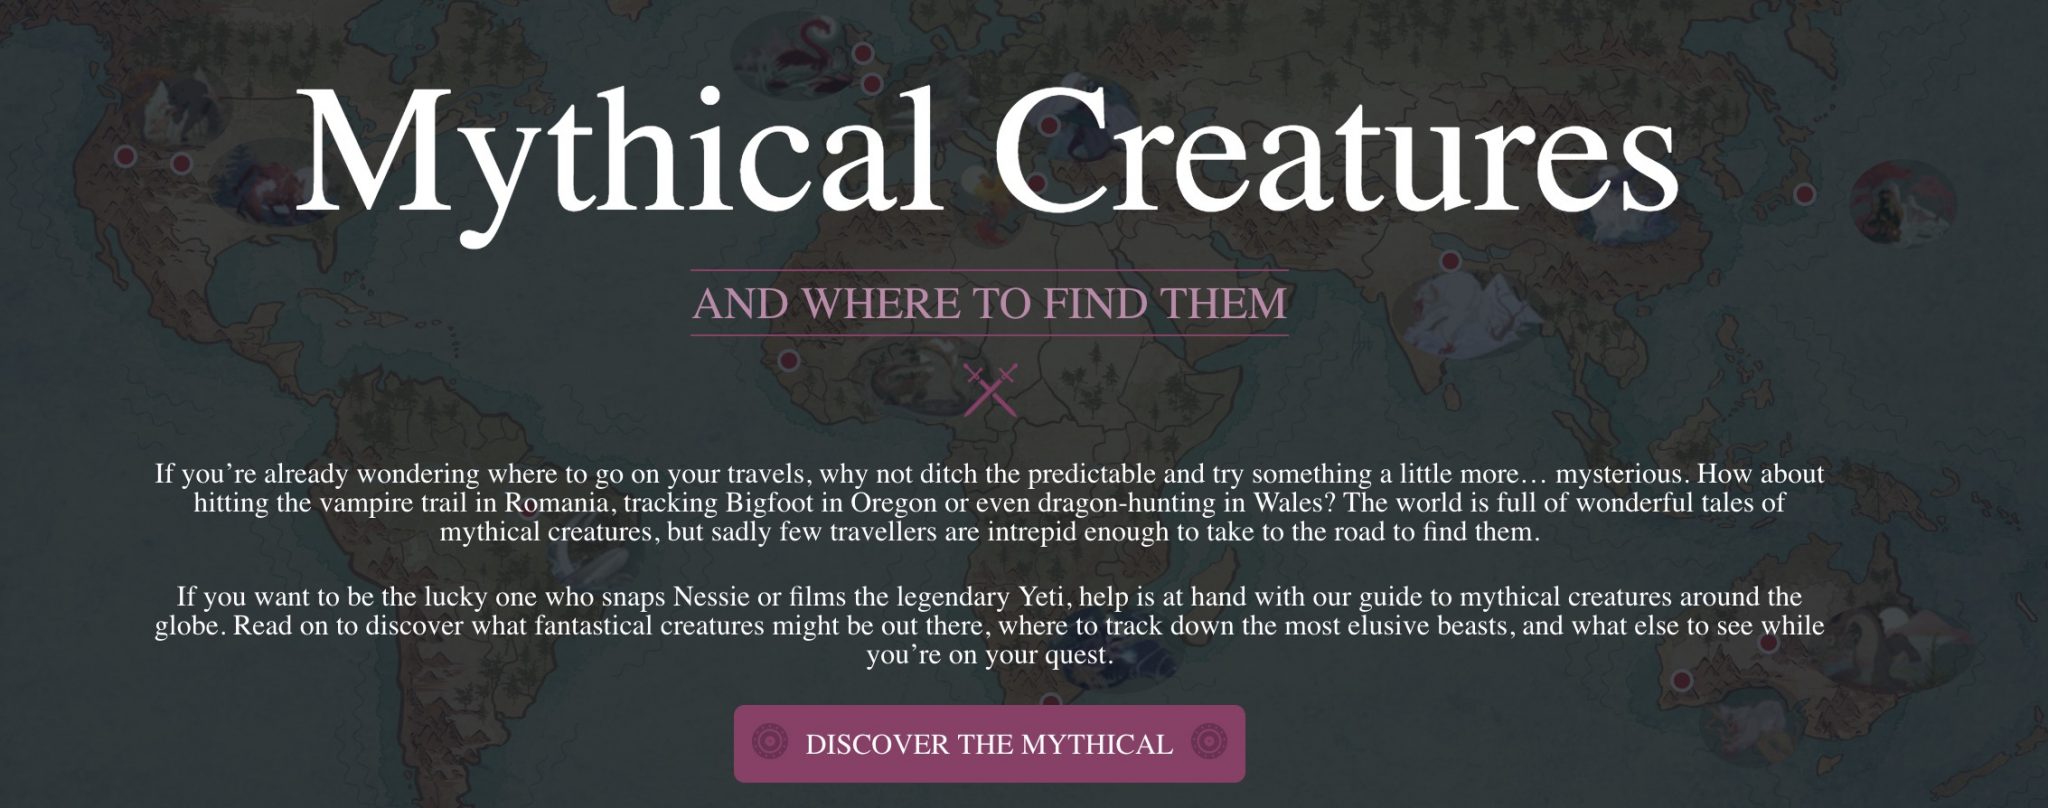 expedia mythical creatures